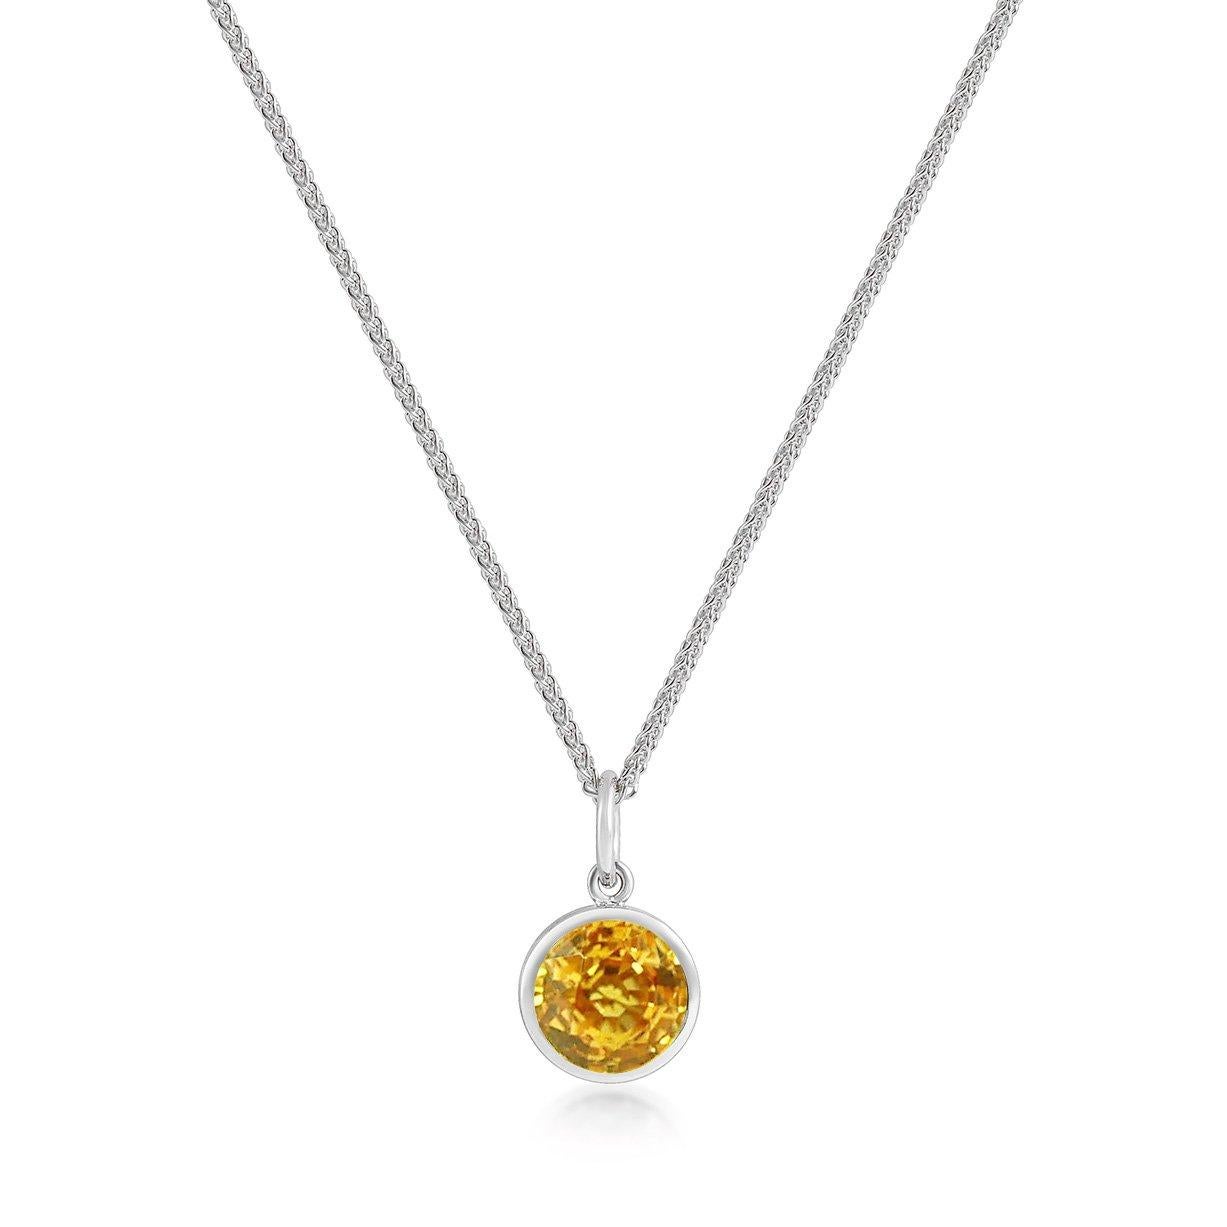 Round Cut Handcrafted 1.50 Carats Yellow Sapphire 18 Karat White Gold Pendant Necklace For Sale